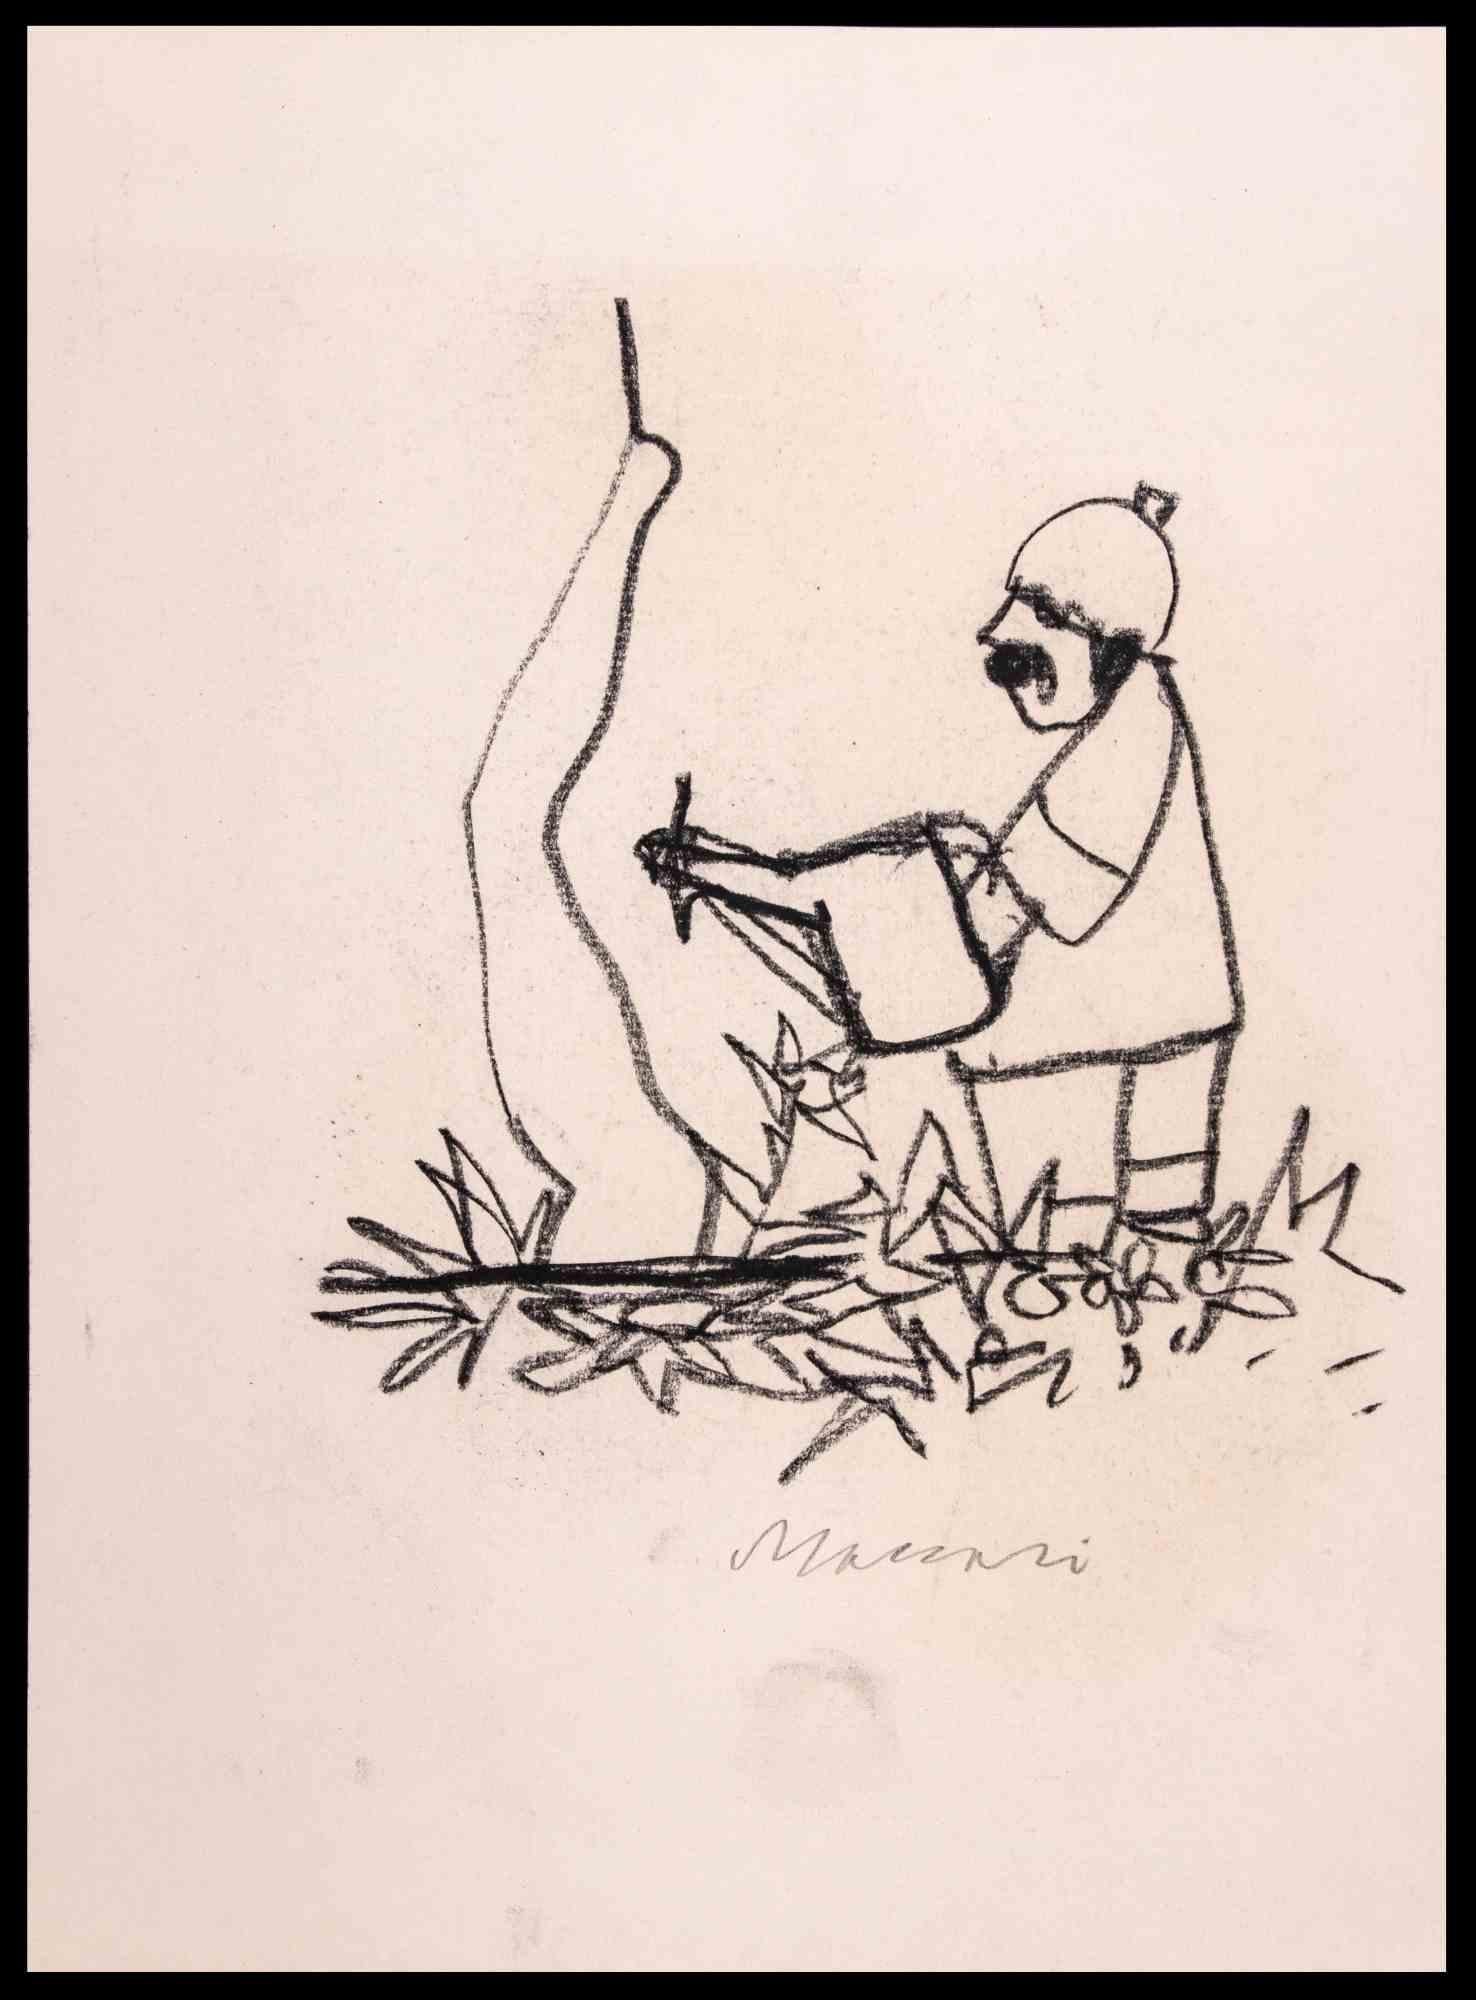 Gardener is a charcoal Drawing realized by Mino Maccari (1924-1989) in 1970s.

Hand-signed and titled on the lower margin.

Good condition on a cream colored paper.

Mino Maccari (Siena, 1924-Rome, June 16, 1989) was an Italian writer, painter,